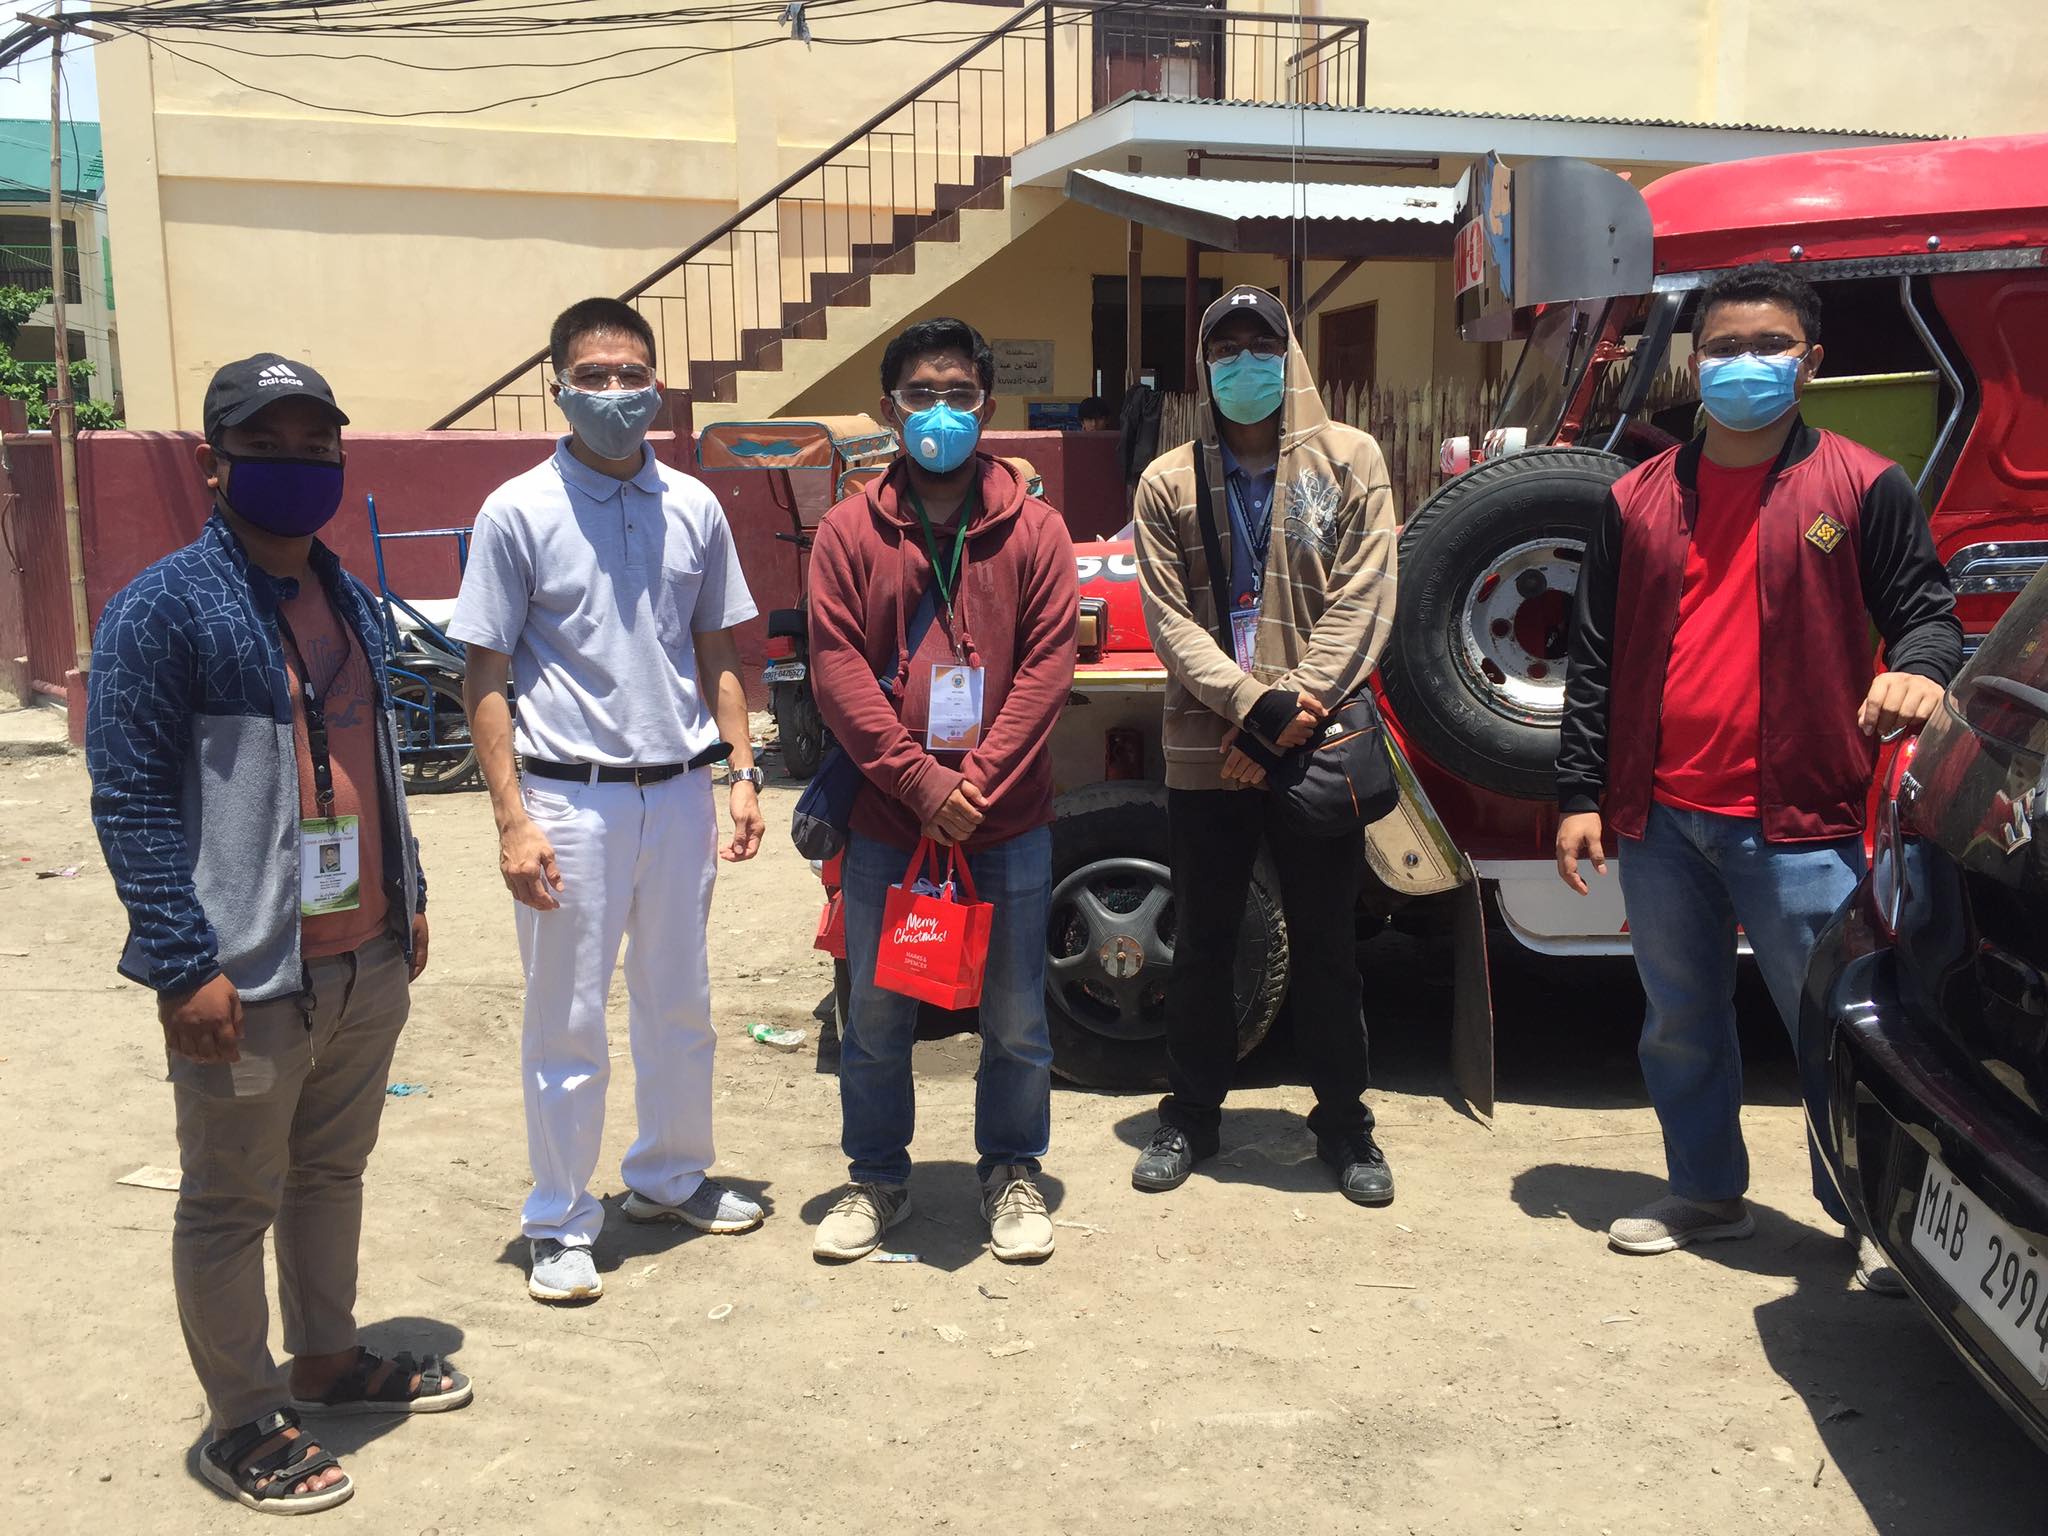 Harvey Yap (2nd from left) and Munadzrin Ipah (rightmost) during a relief mission in Zamboanga. 【Photo by Tzu Chi Zamboanga】